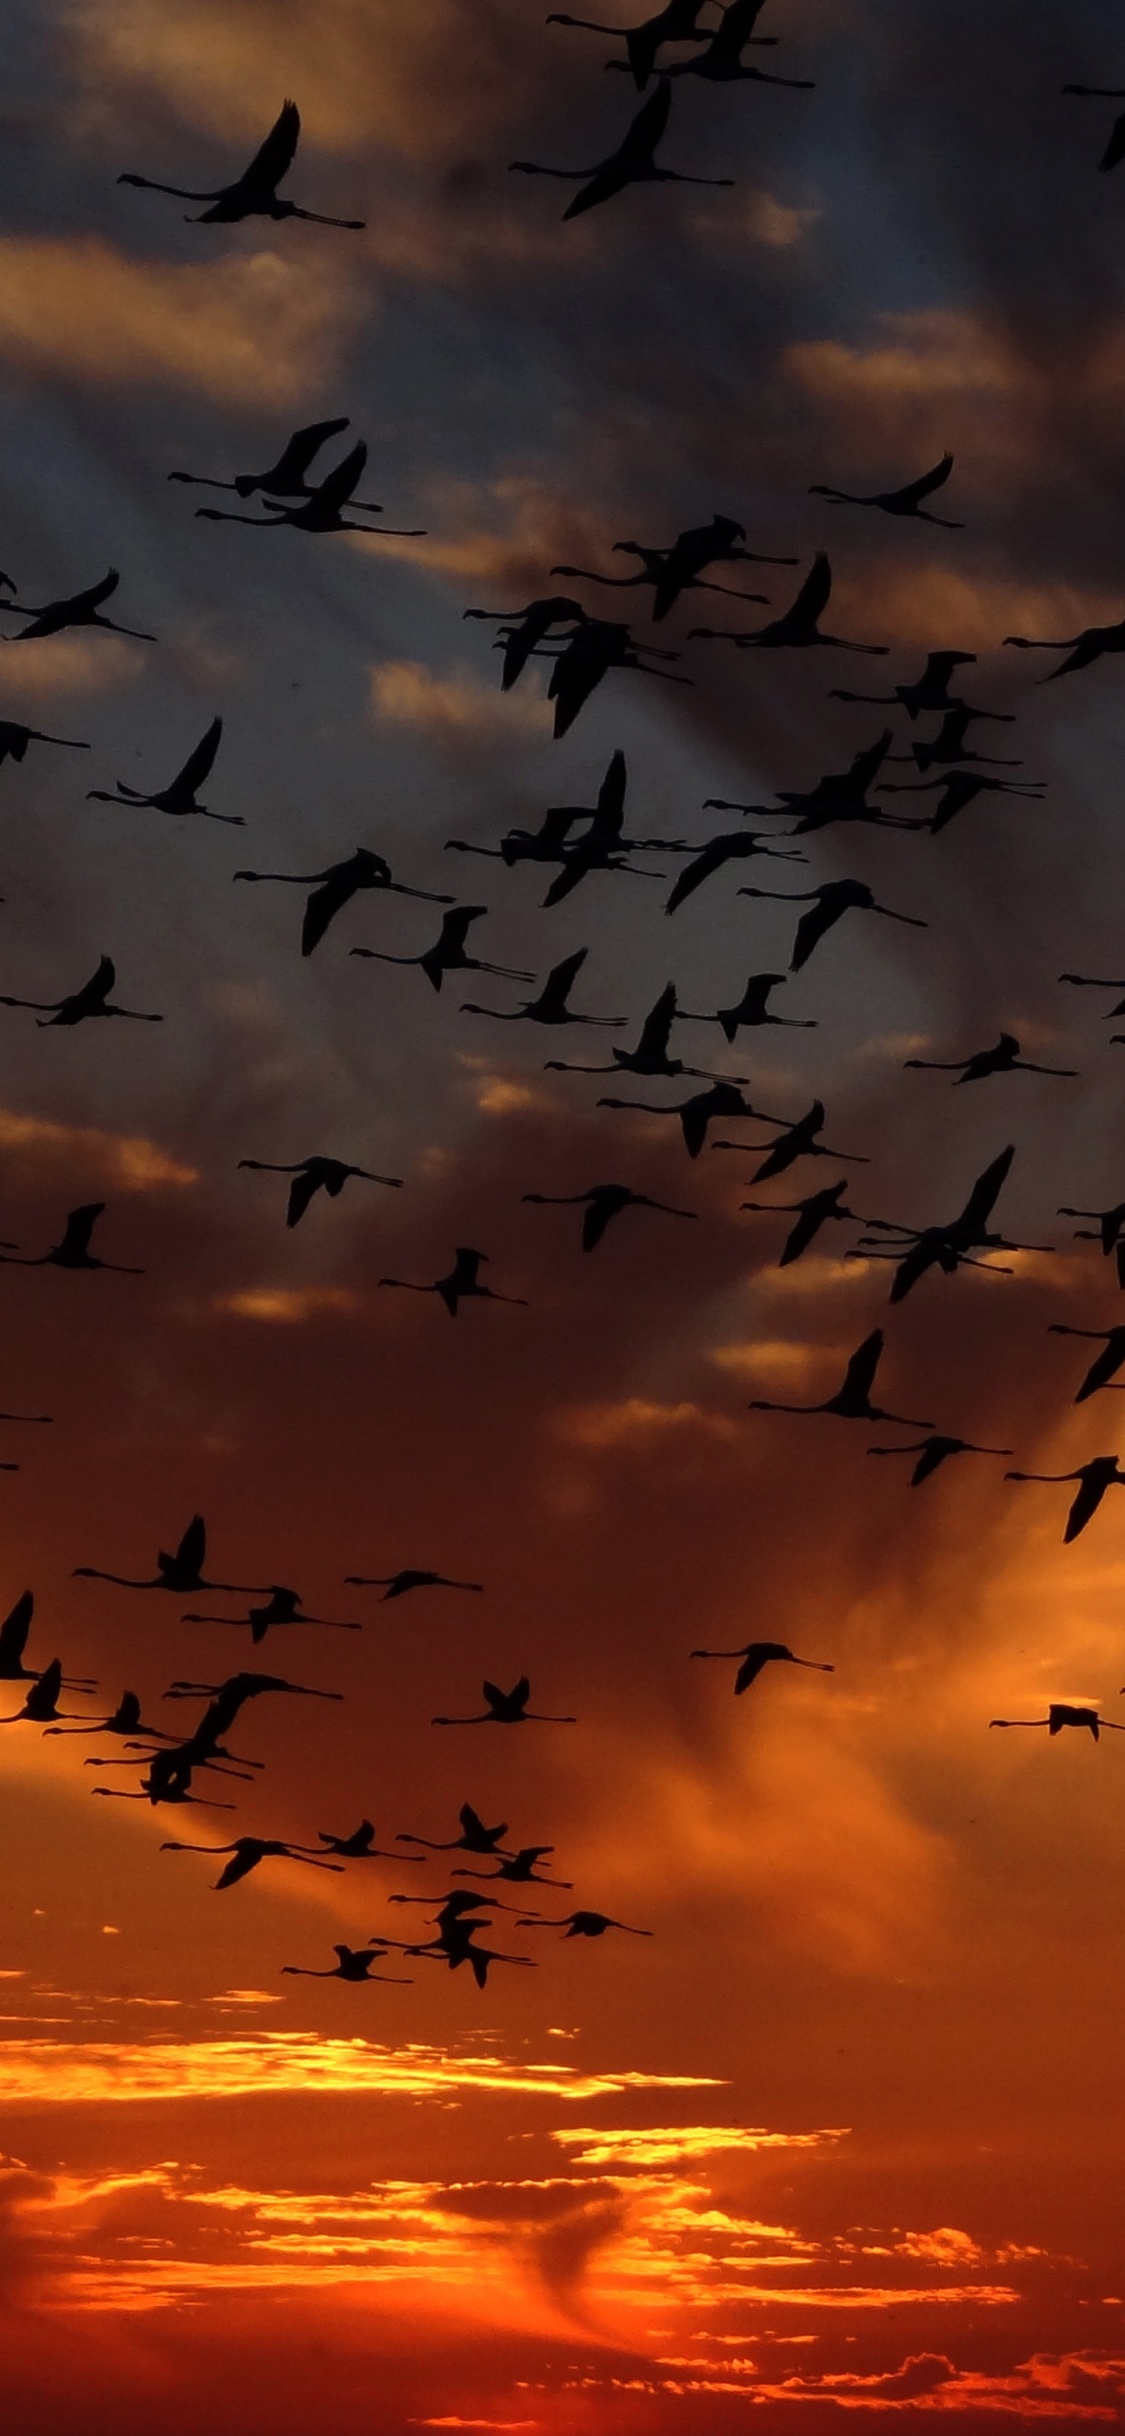 Silhouette of Flock of Birds Flying During Sunset. Wallpaper in 1125x2436 Resolution